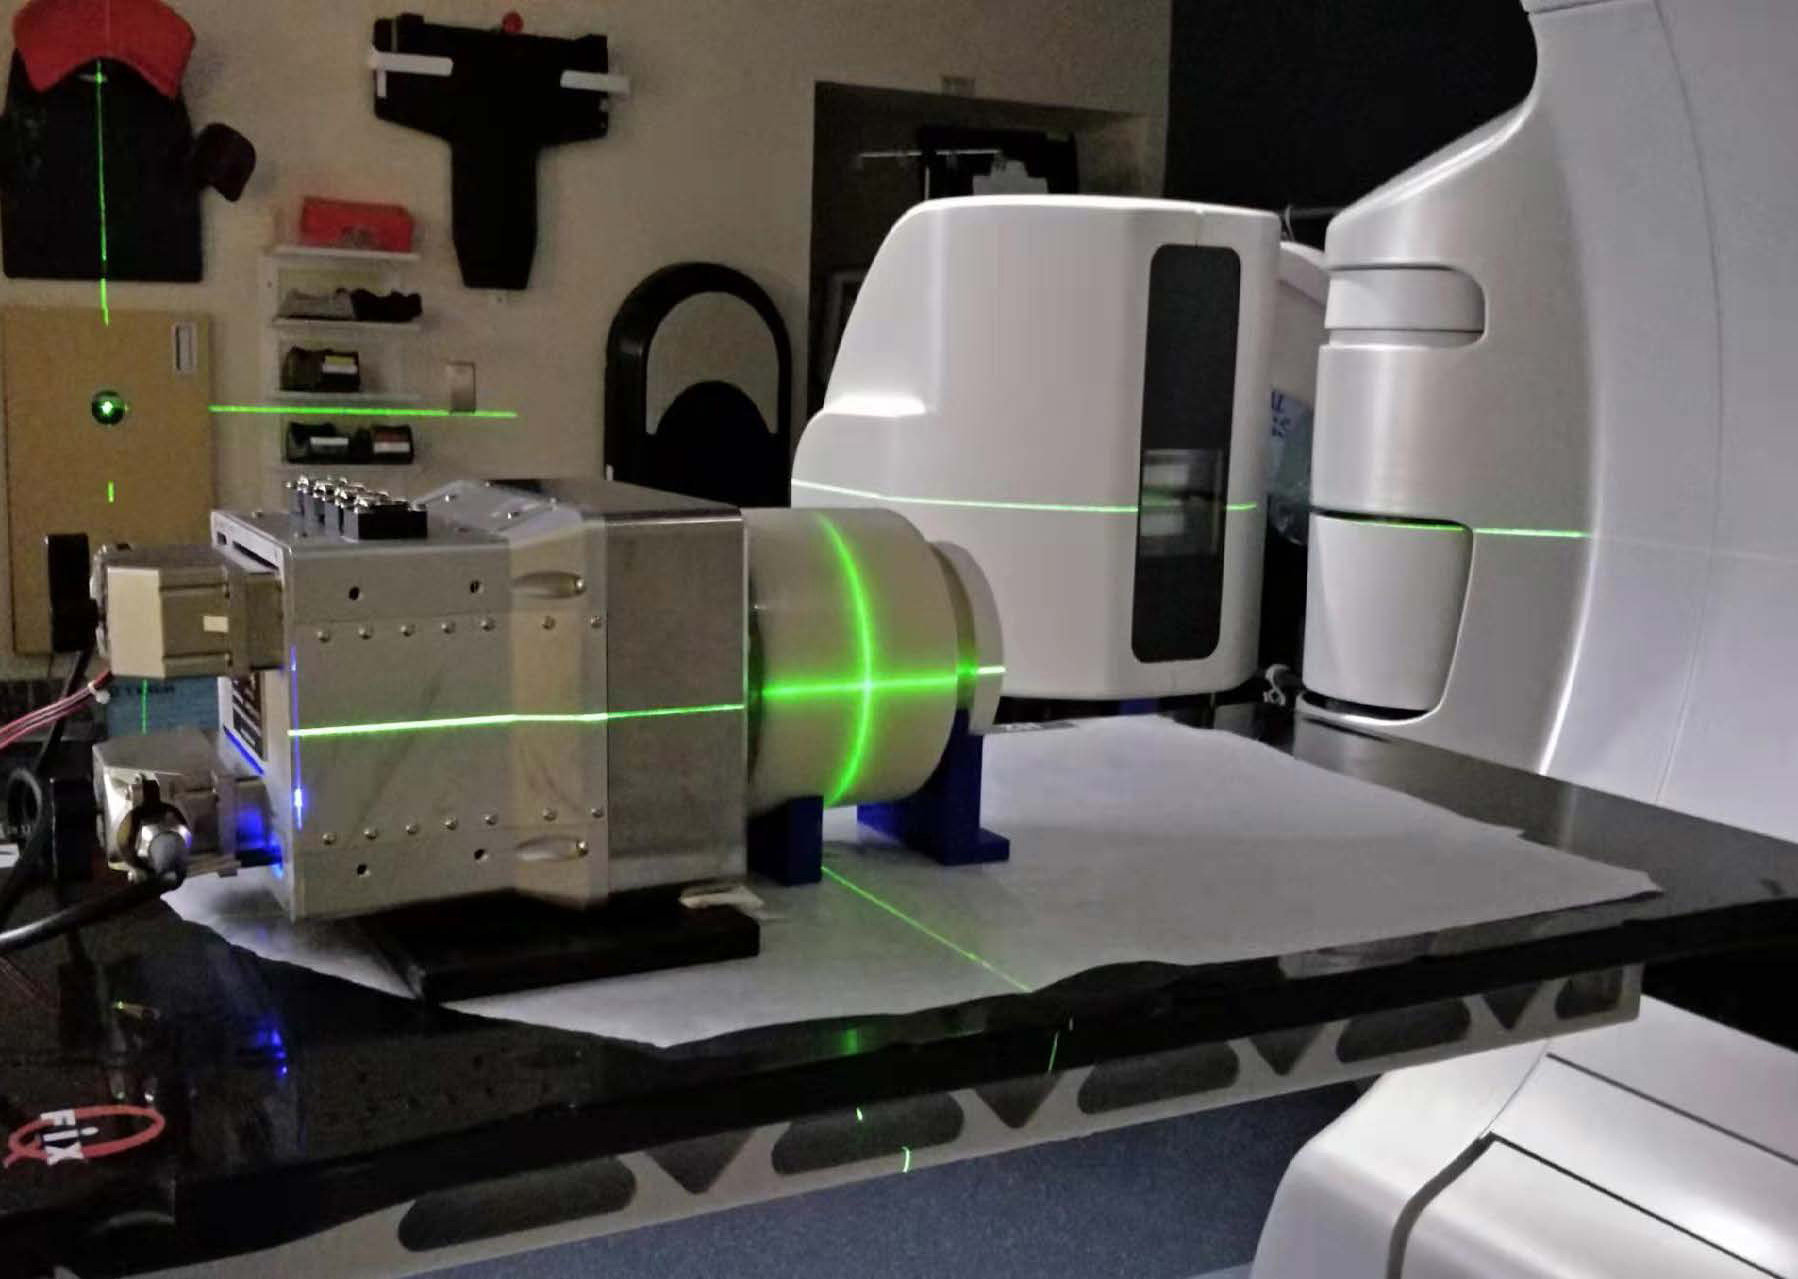 Tracking radiation treatment in real time promises safer, more